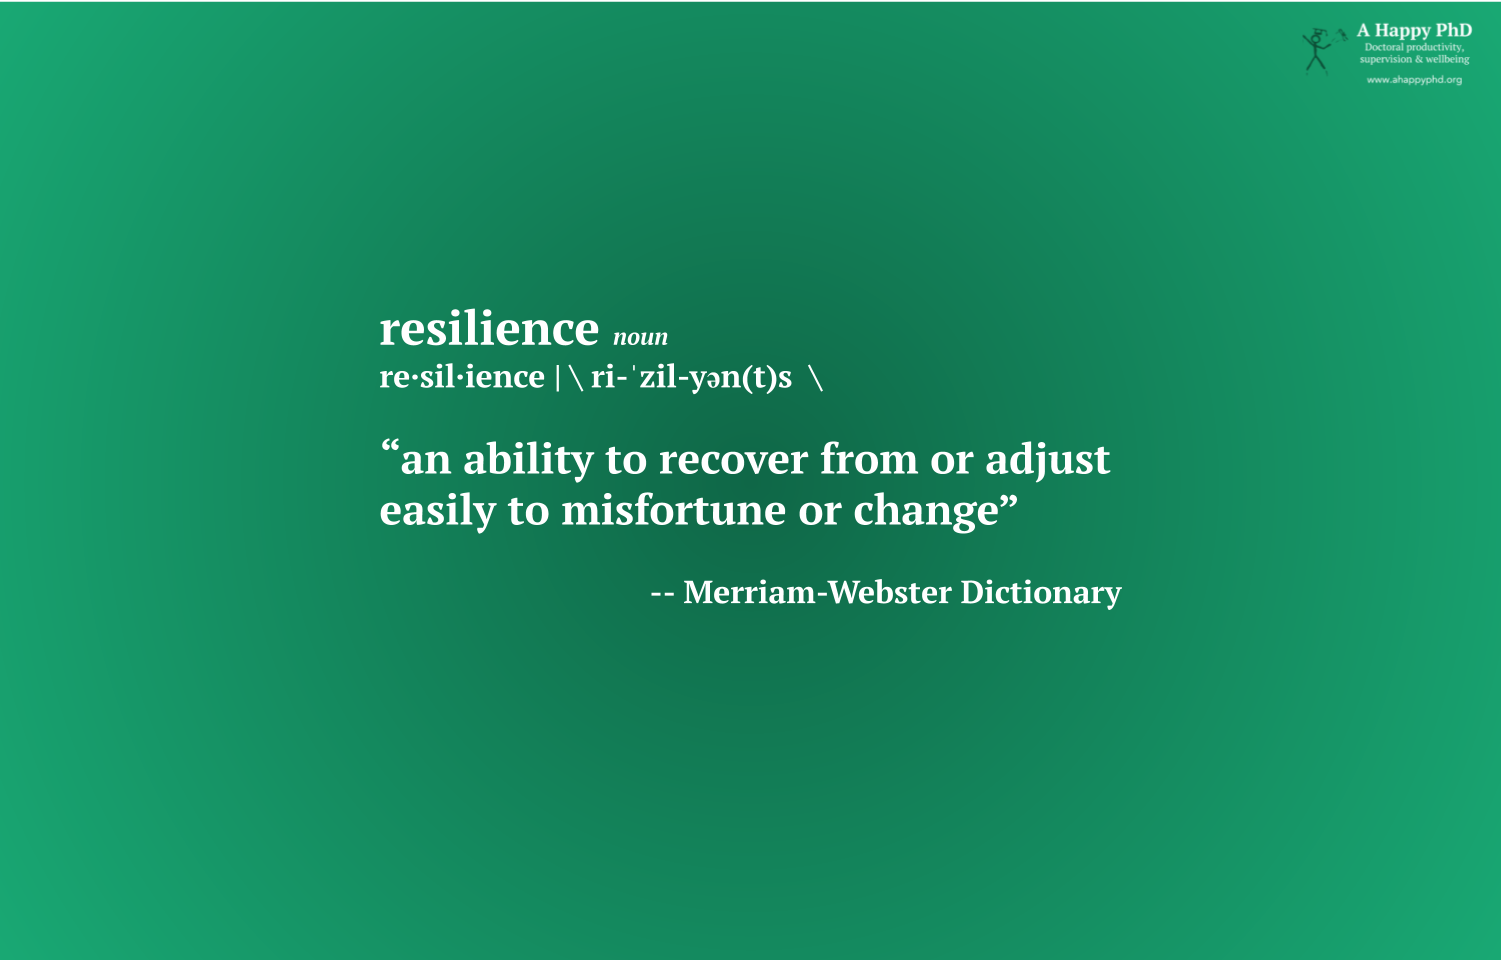 Resilience: an ability to recover from or adjust easily to misfortune or change